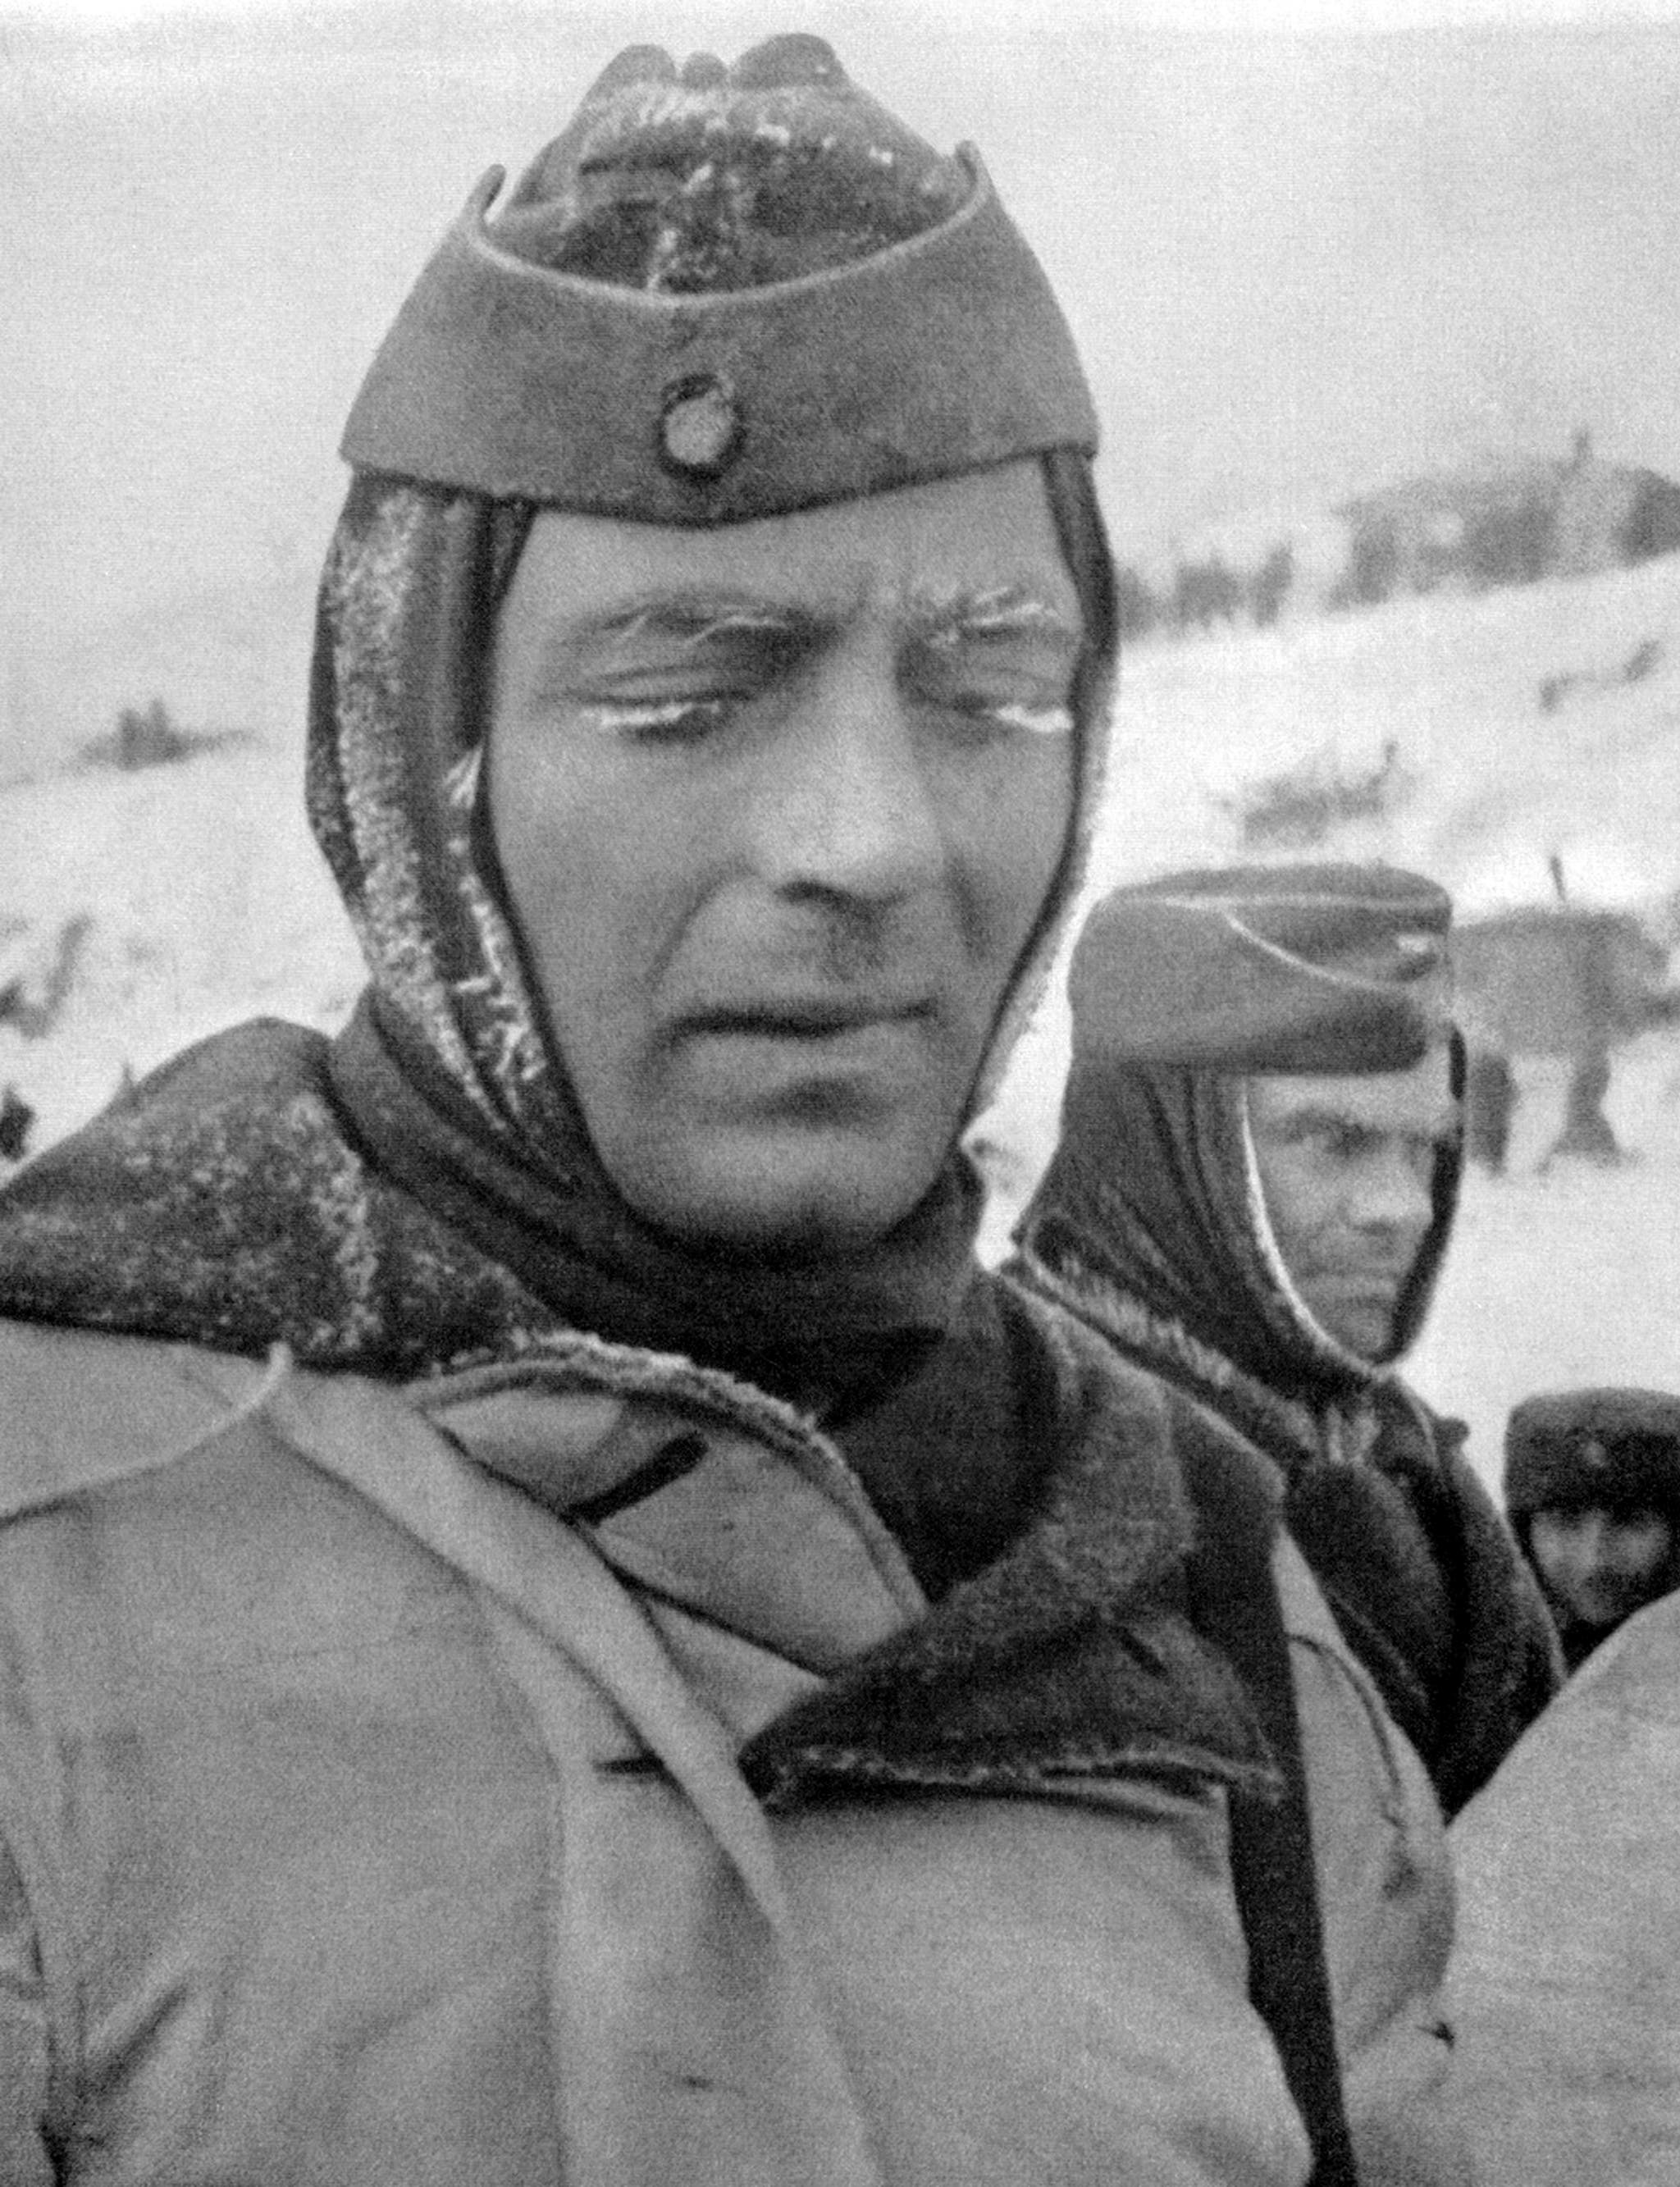 German soldiers exposed to bitter sub-zero conditions at Stalingrad, winter 1942-1943.